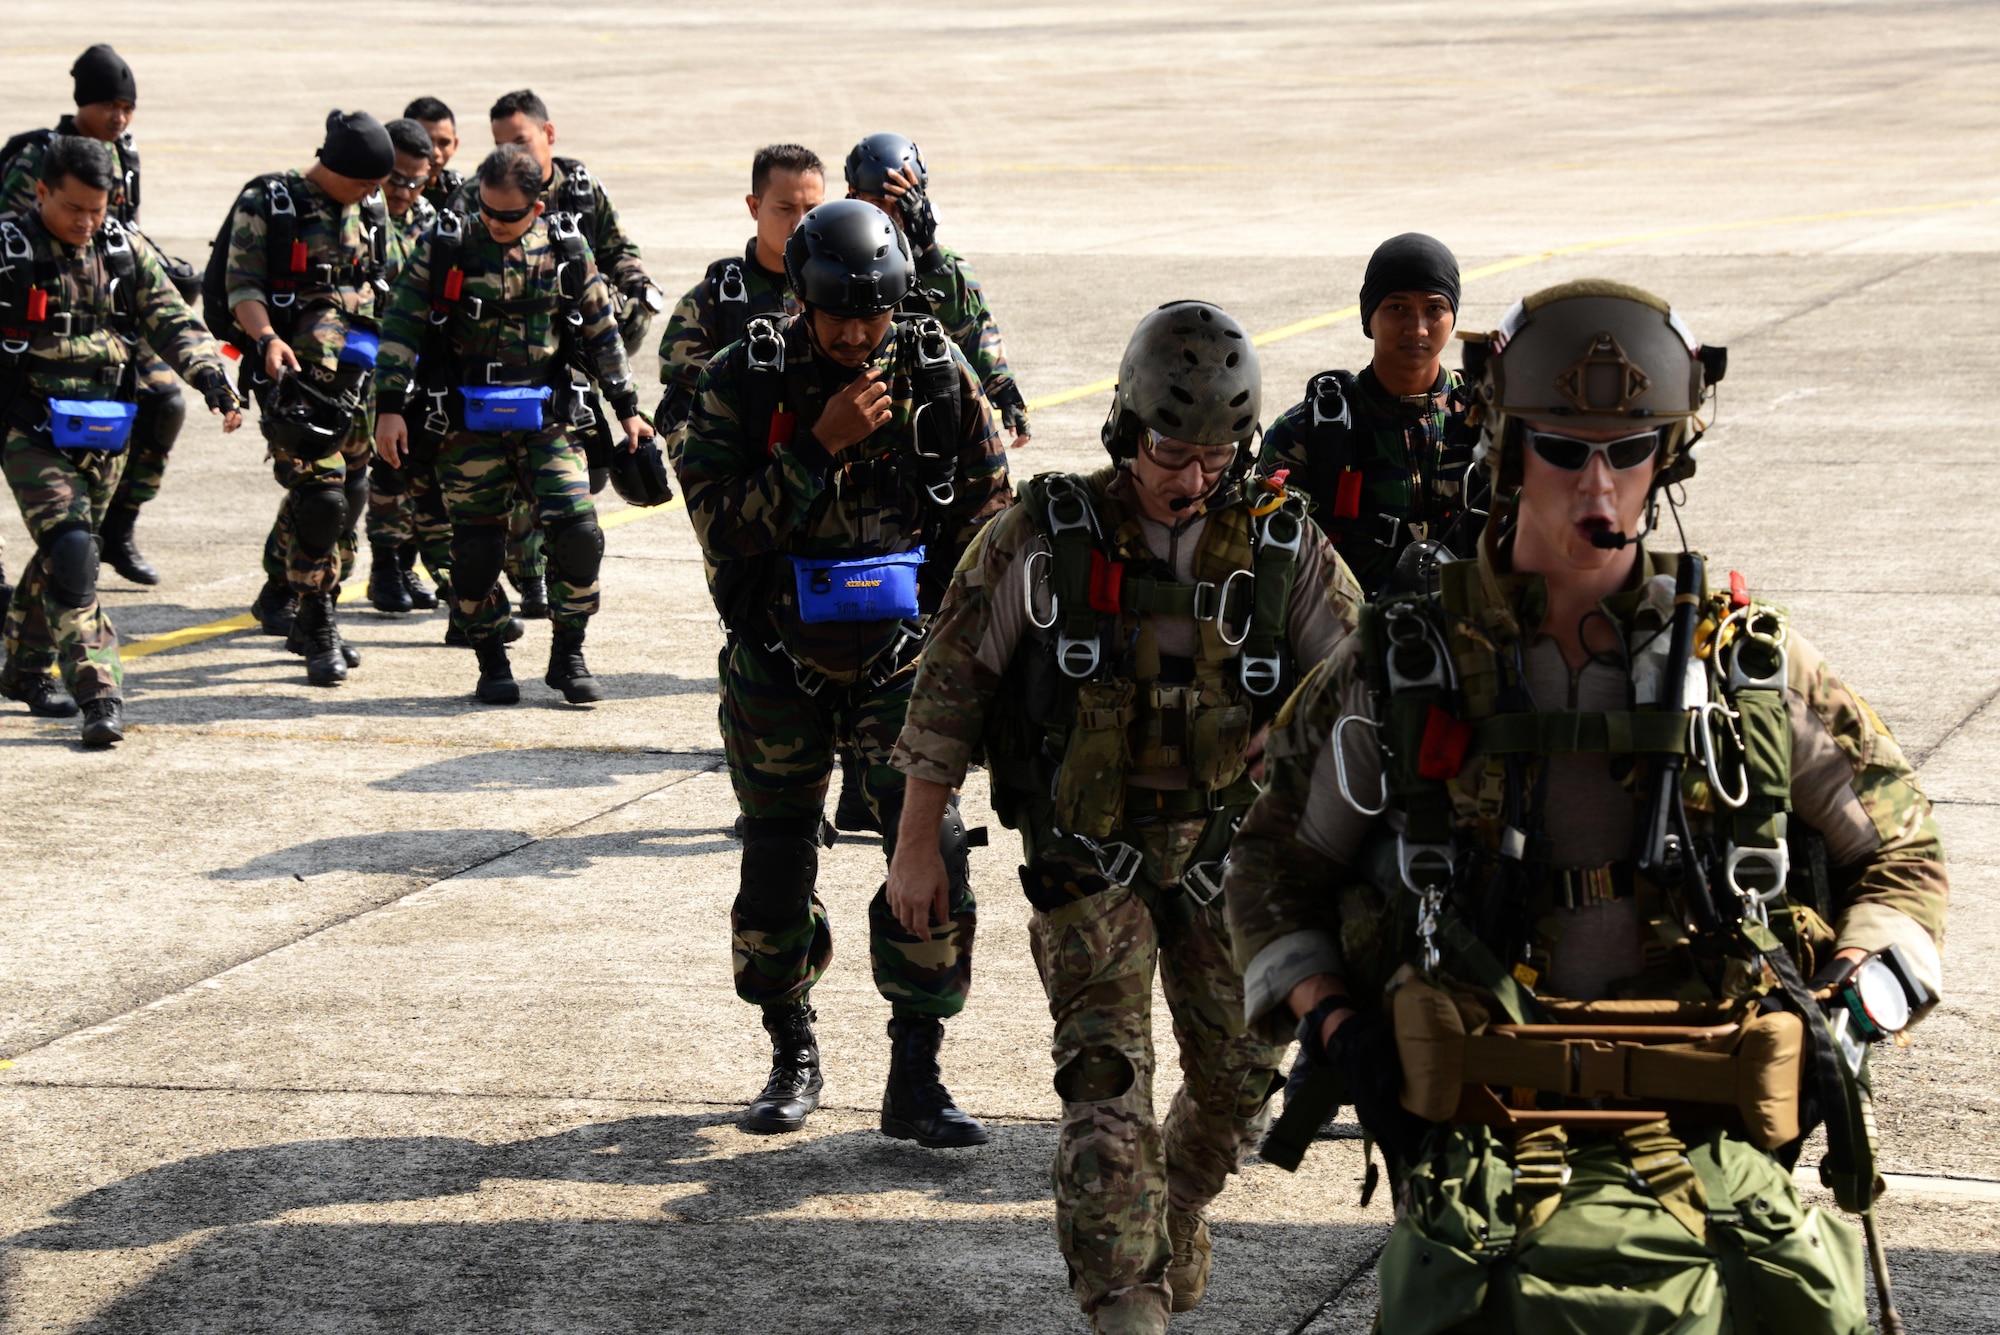 Special Tactics Airmen from the 320th Special Tactics Squadron and the 22nd Special Tactics Squadron, board an MC-130J Commando II with Royal Malaysian Air Force Pasukan Khas Udara in Kuantan, Malaysia, June 8, 2015.  The high-altitude low-opening jumps were conducted as part of Exercise Teak Mint, a multinational and bilateral exercise between the Royal Malaysian Air Force and the U.S. Air Force.  (U.S. Air Force photo by Tech. Sgt. Kristine Dreyer)  